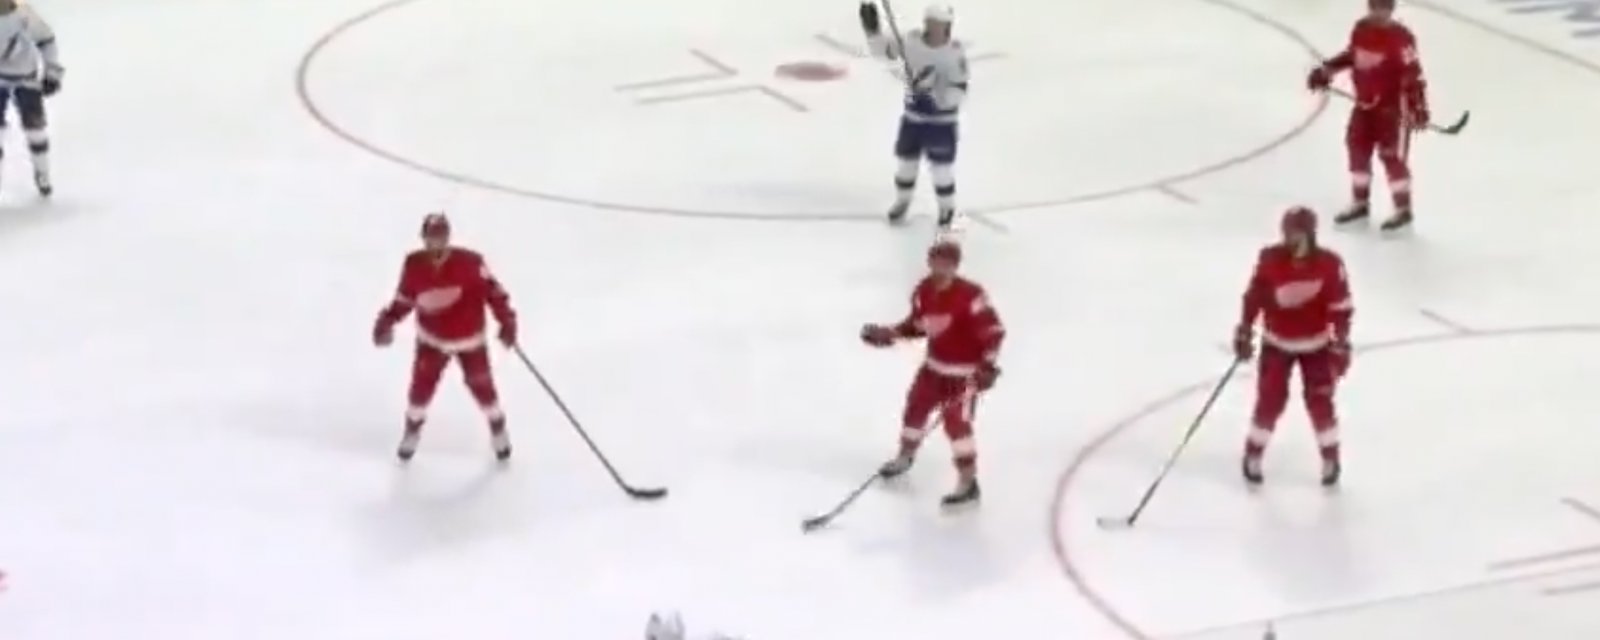 Red Wings’ horn goes off nonstop and ruins Bolts’ play! 